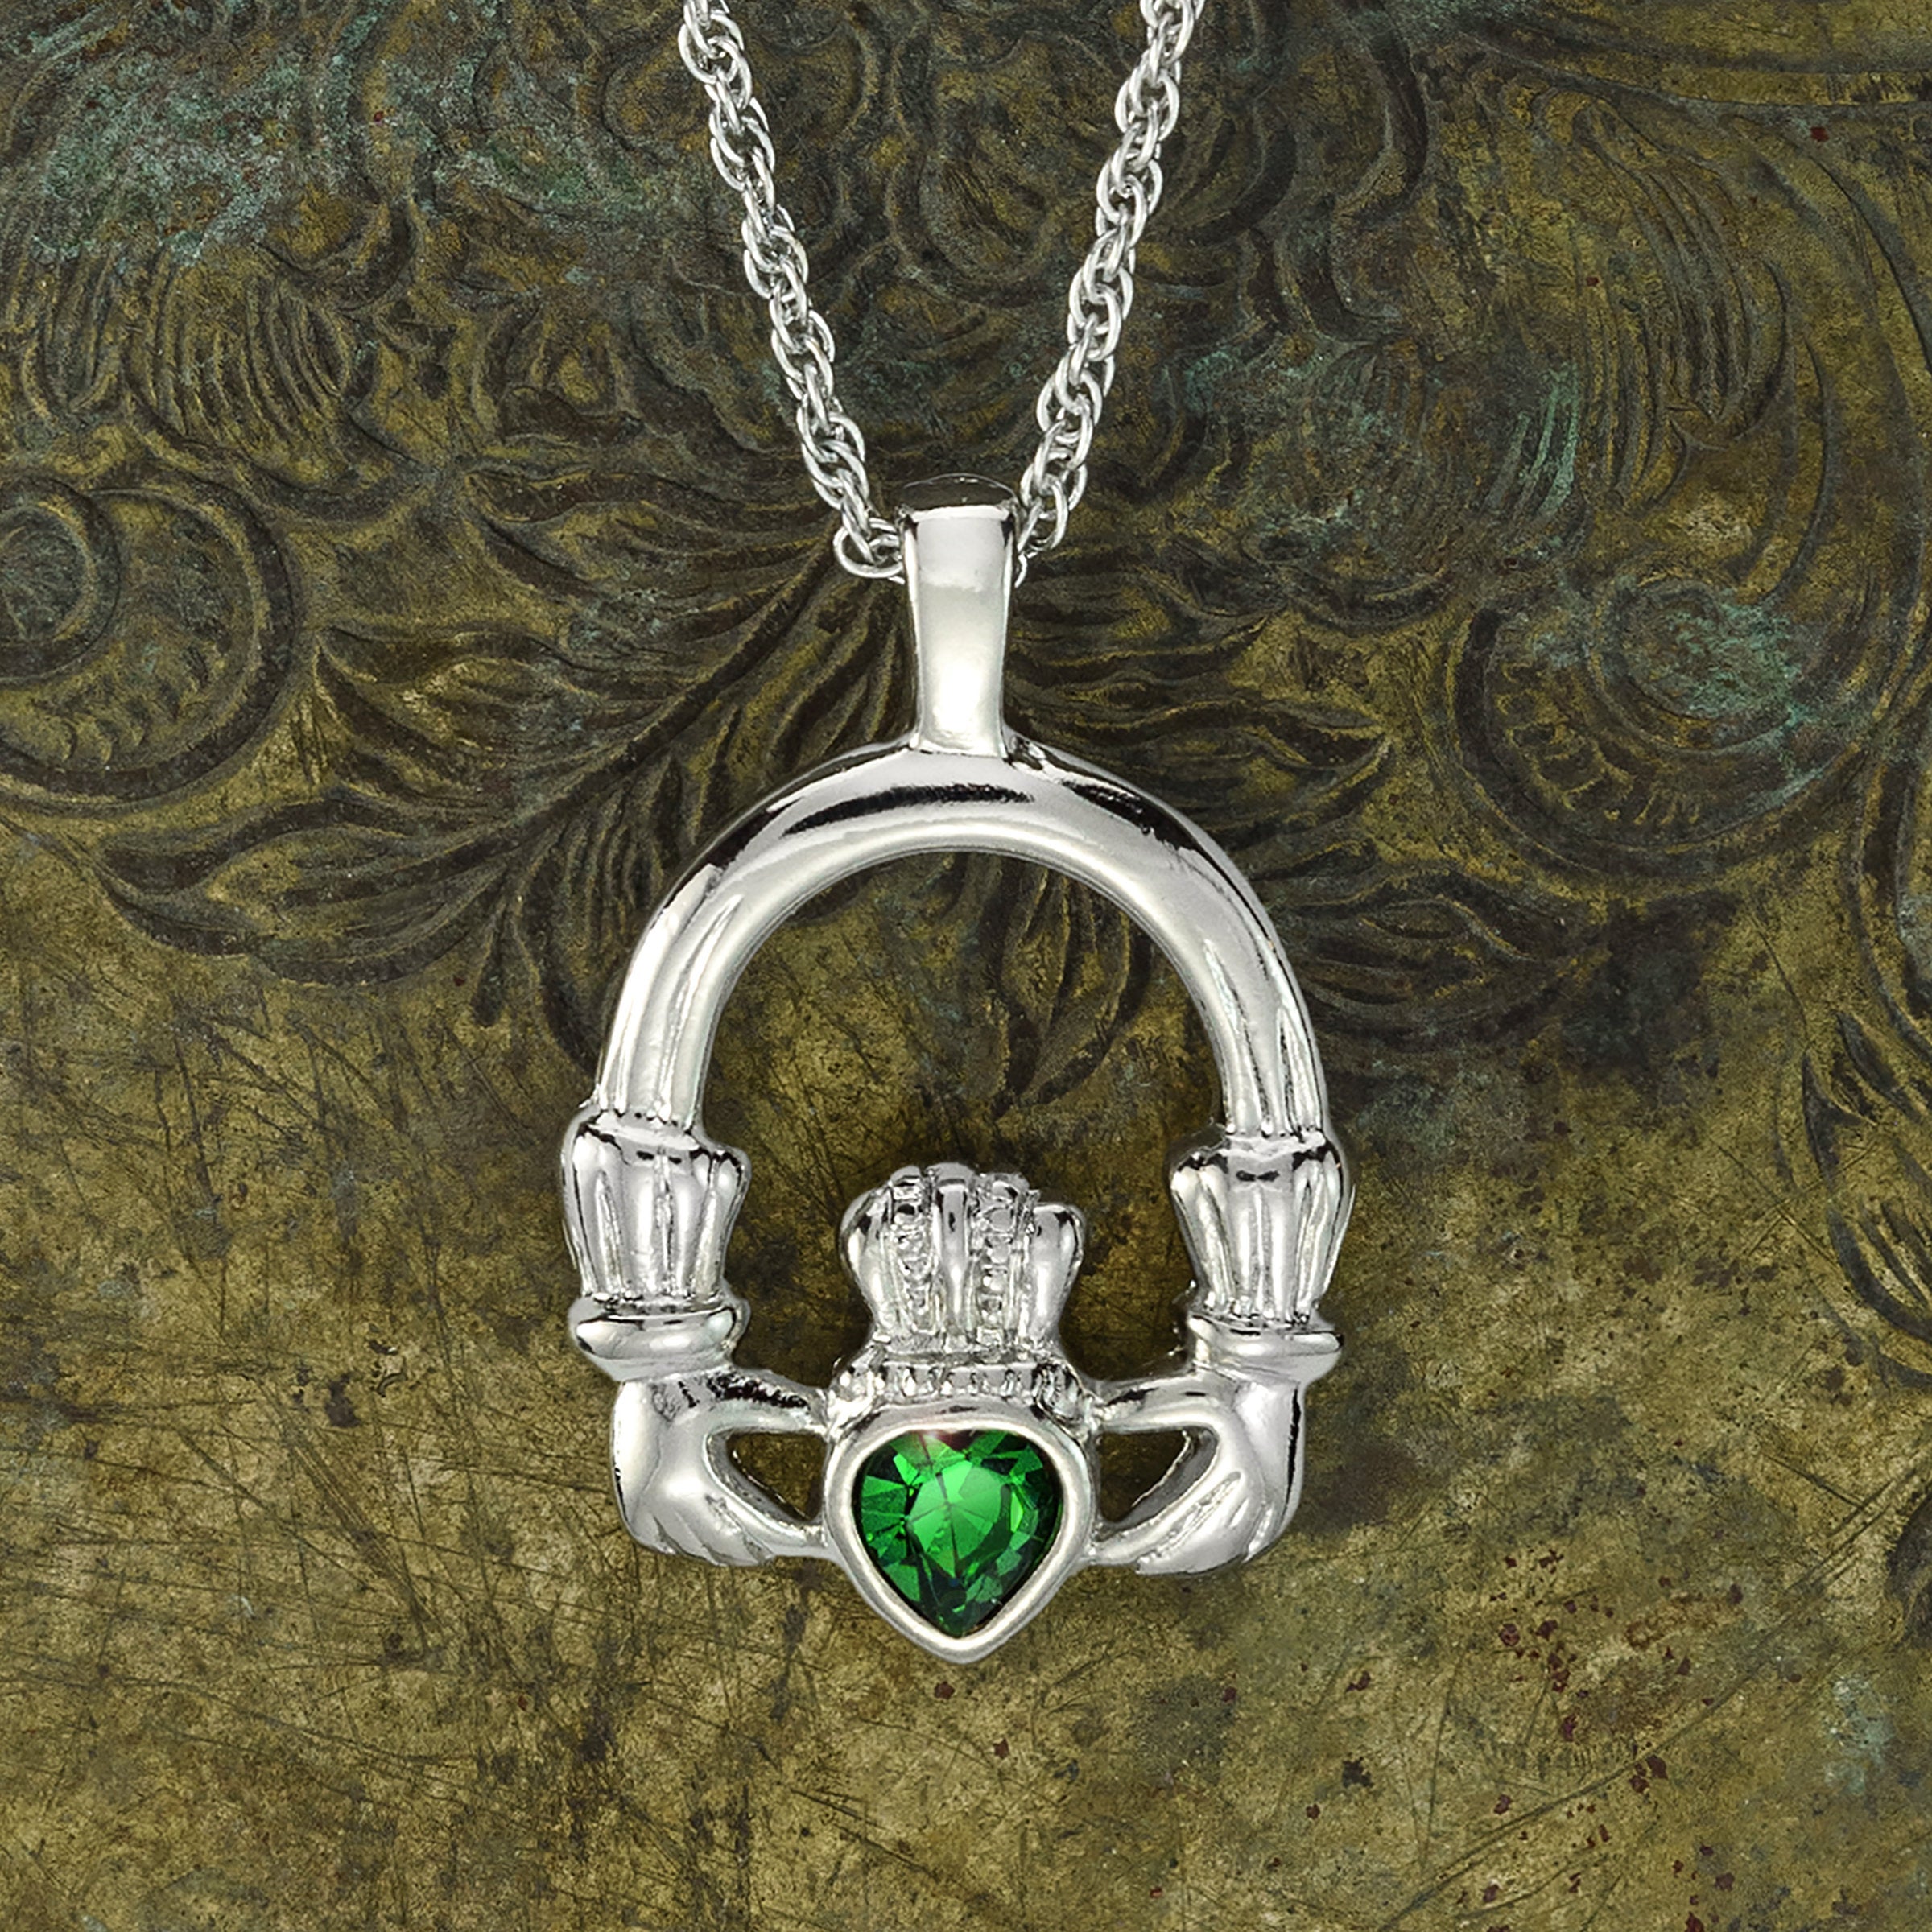 Faith Sterling Silver Sterling Silver CZ Claddagh with Green Stone Necklace  18x15mm, 16-18